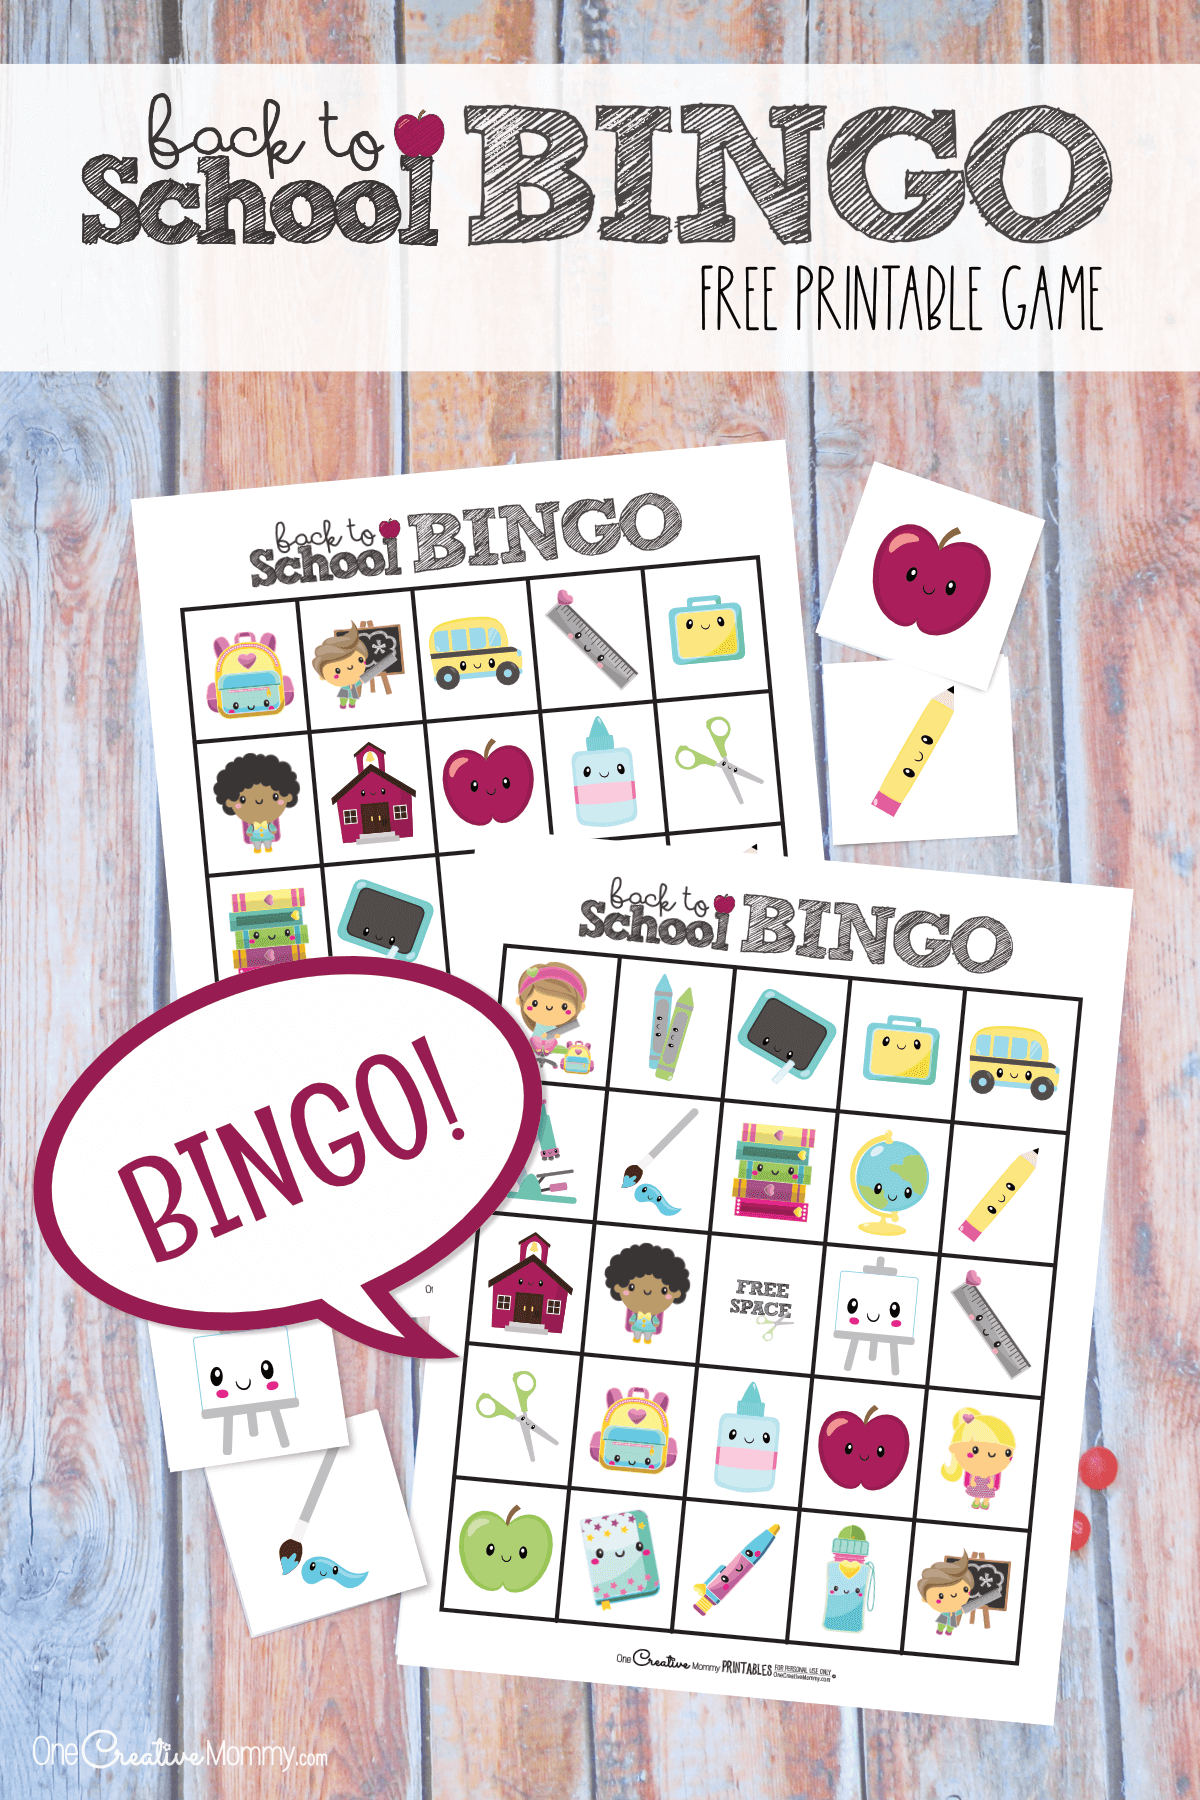 This back to school bingo game will be so fun to play on the first day of school! {OneCreativeMommy.com} #bingo #backtoschool #freeprintable